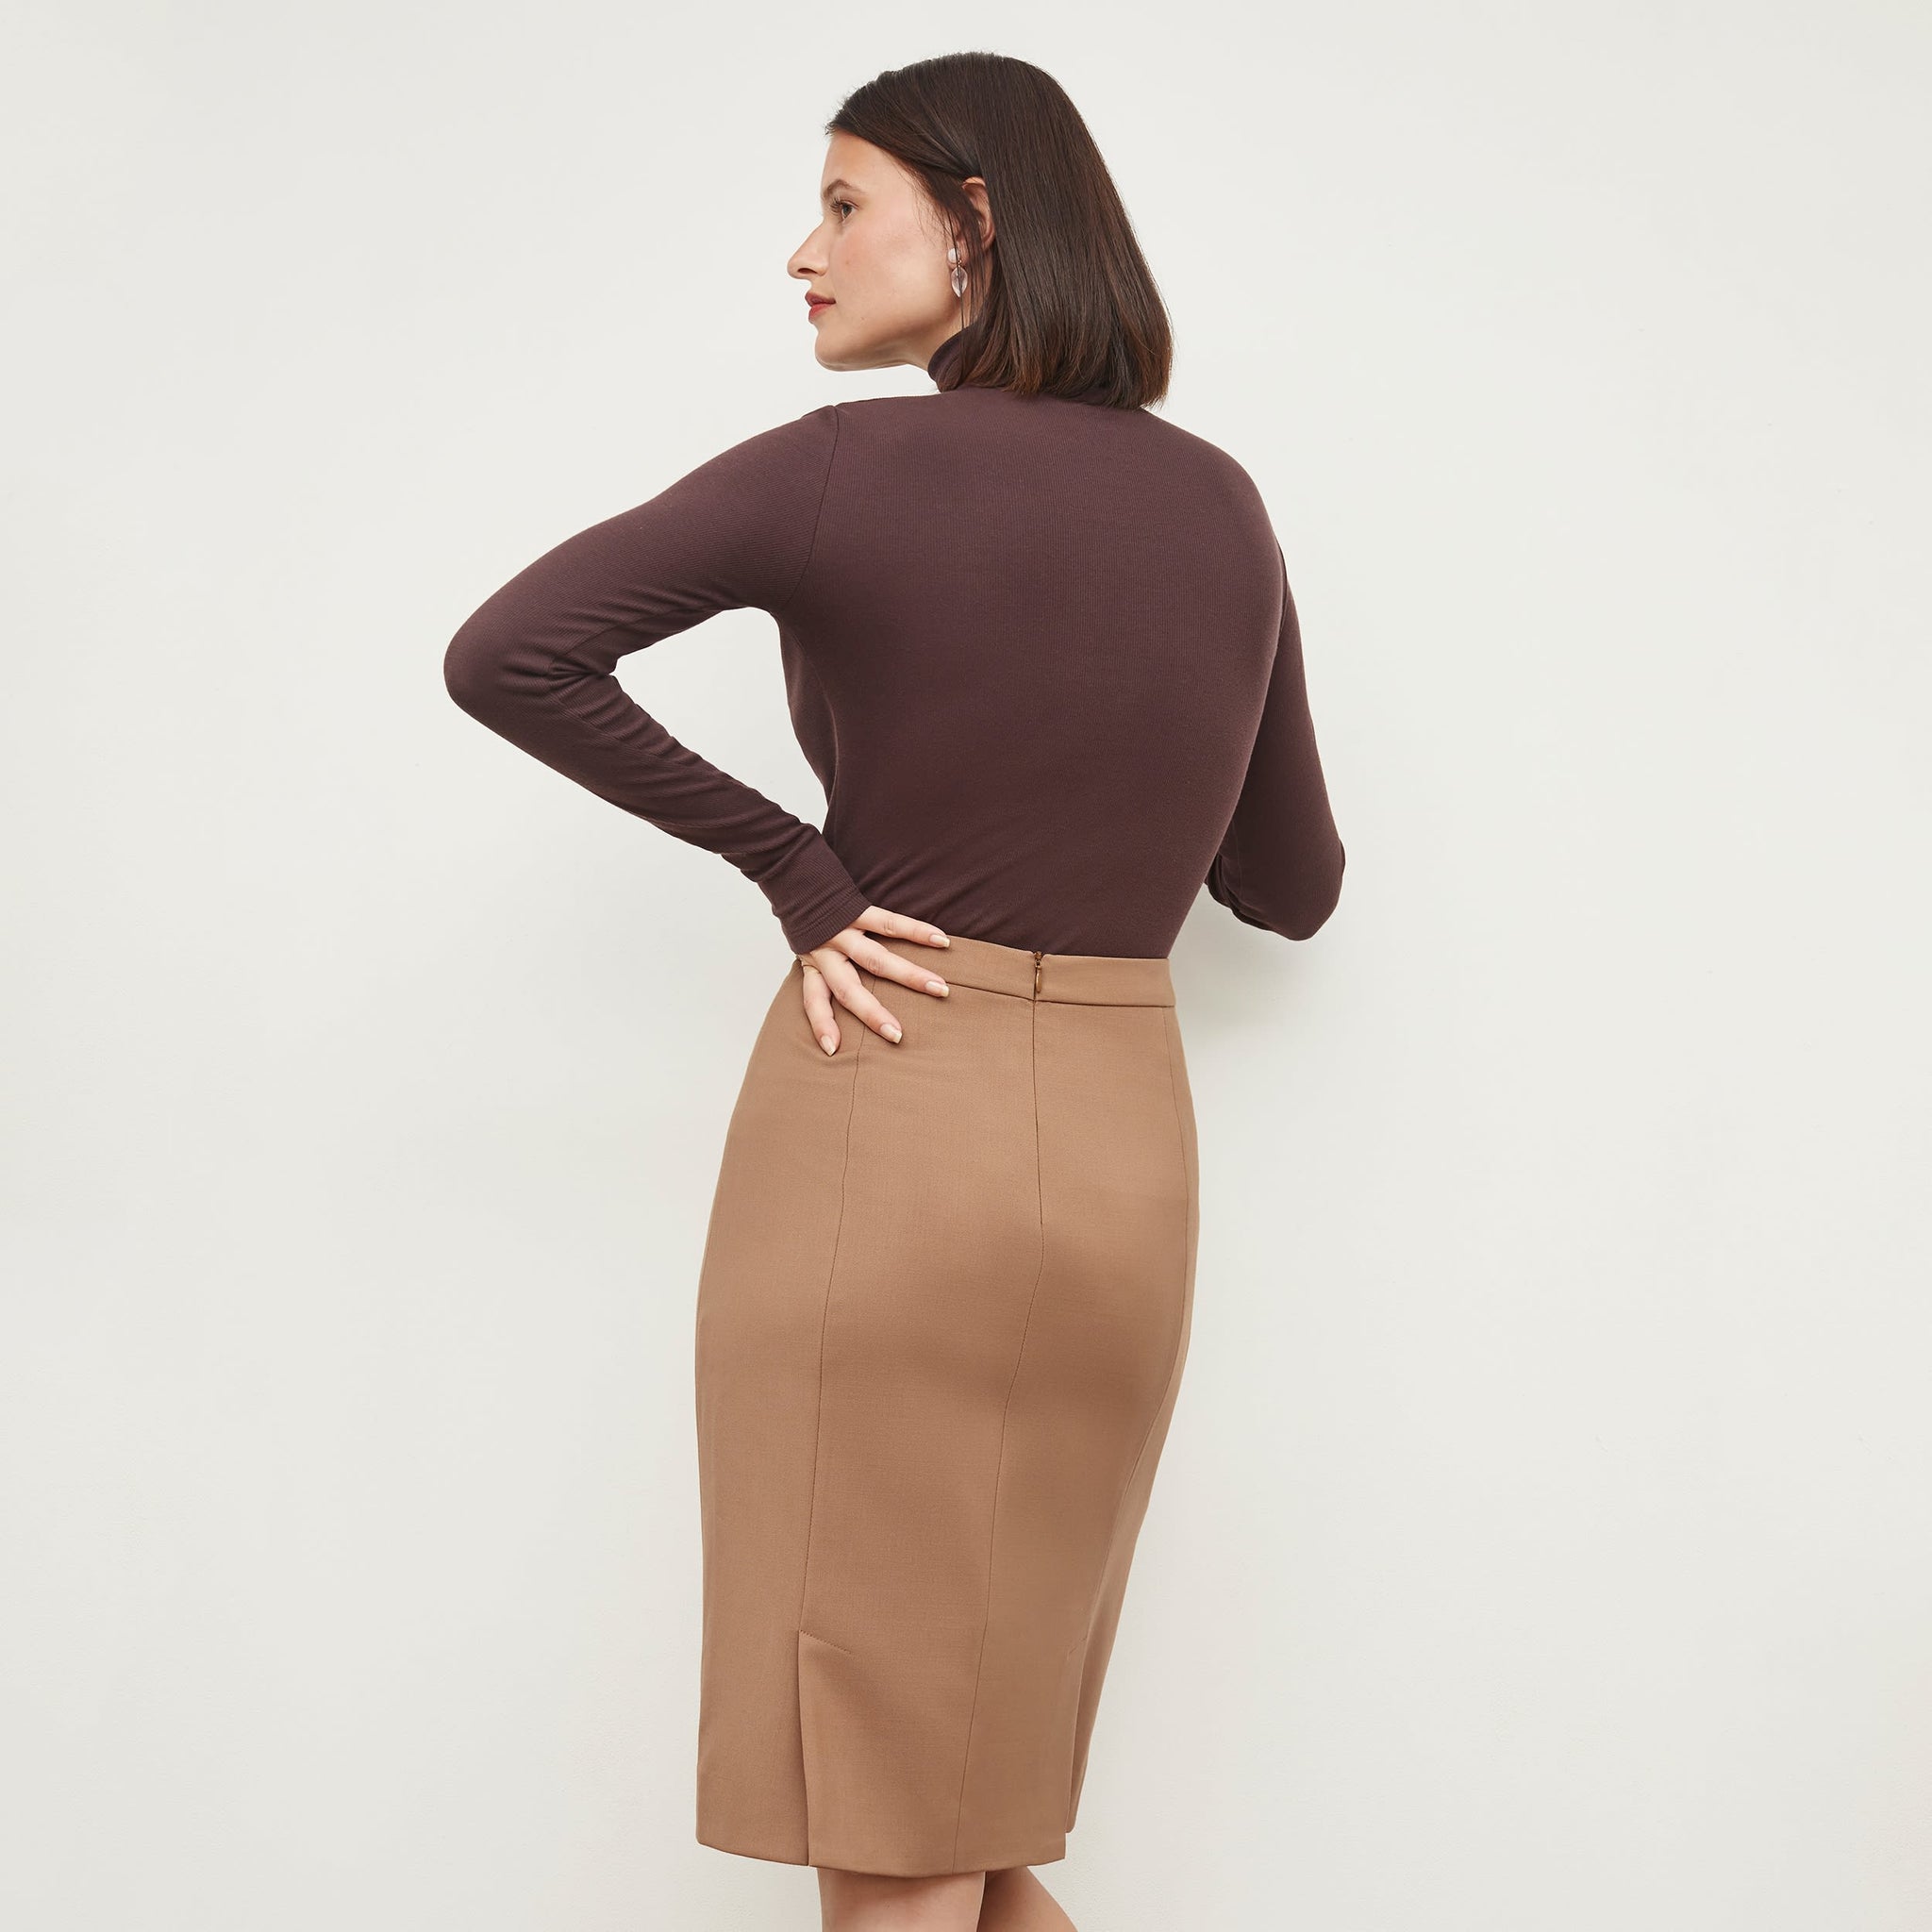 Back image of a woman standing wearing the Cobble Hill Skirt in Camel